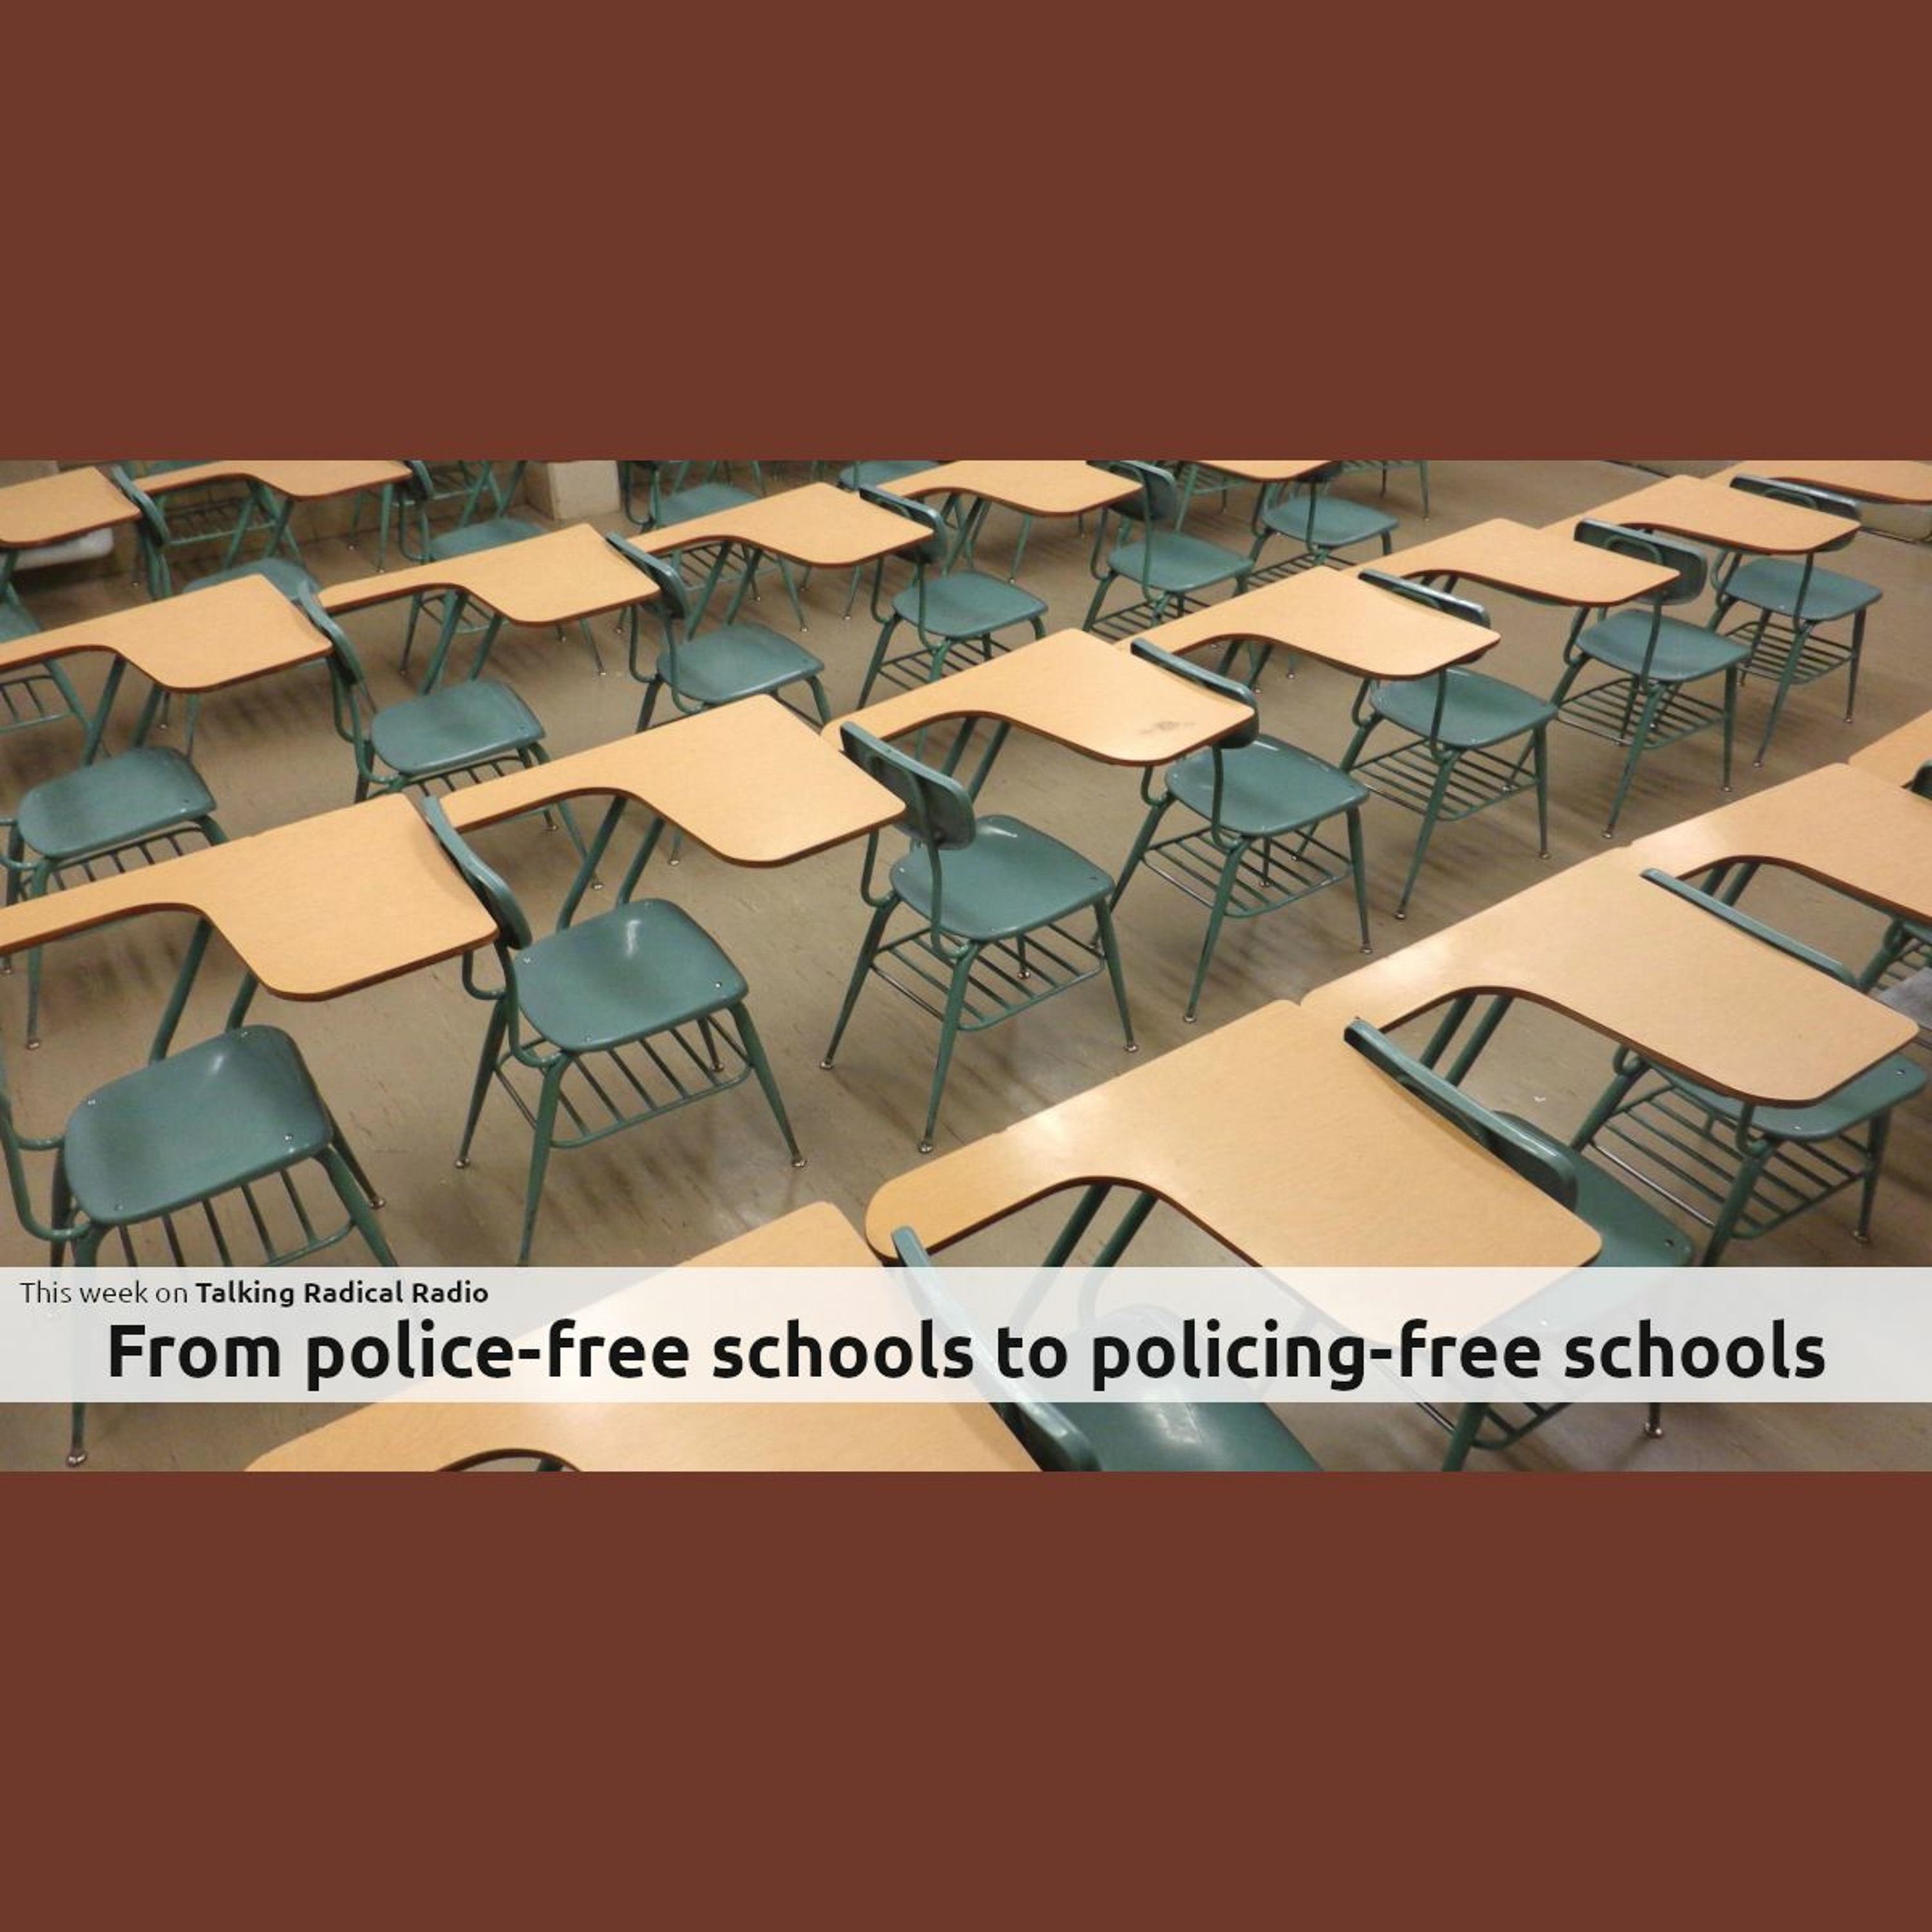 From police-free schools to policing-free schools